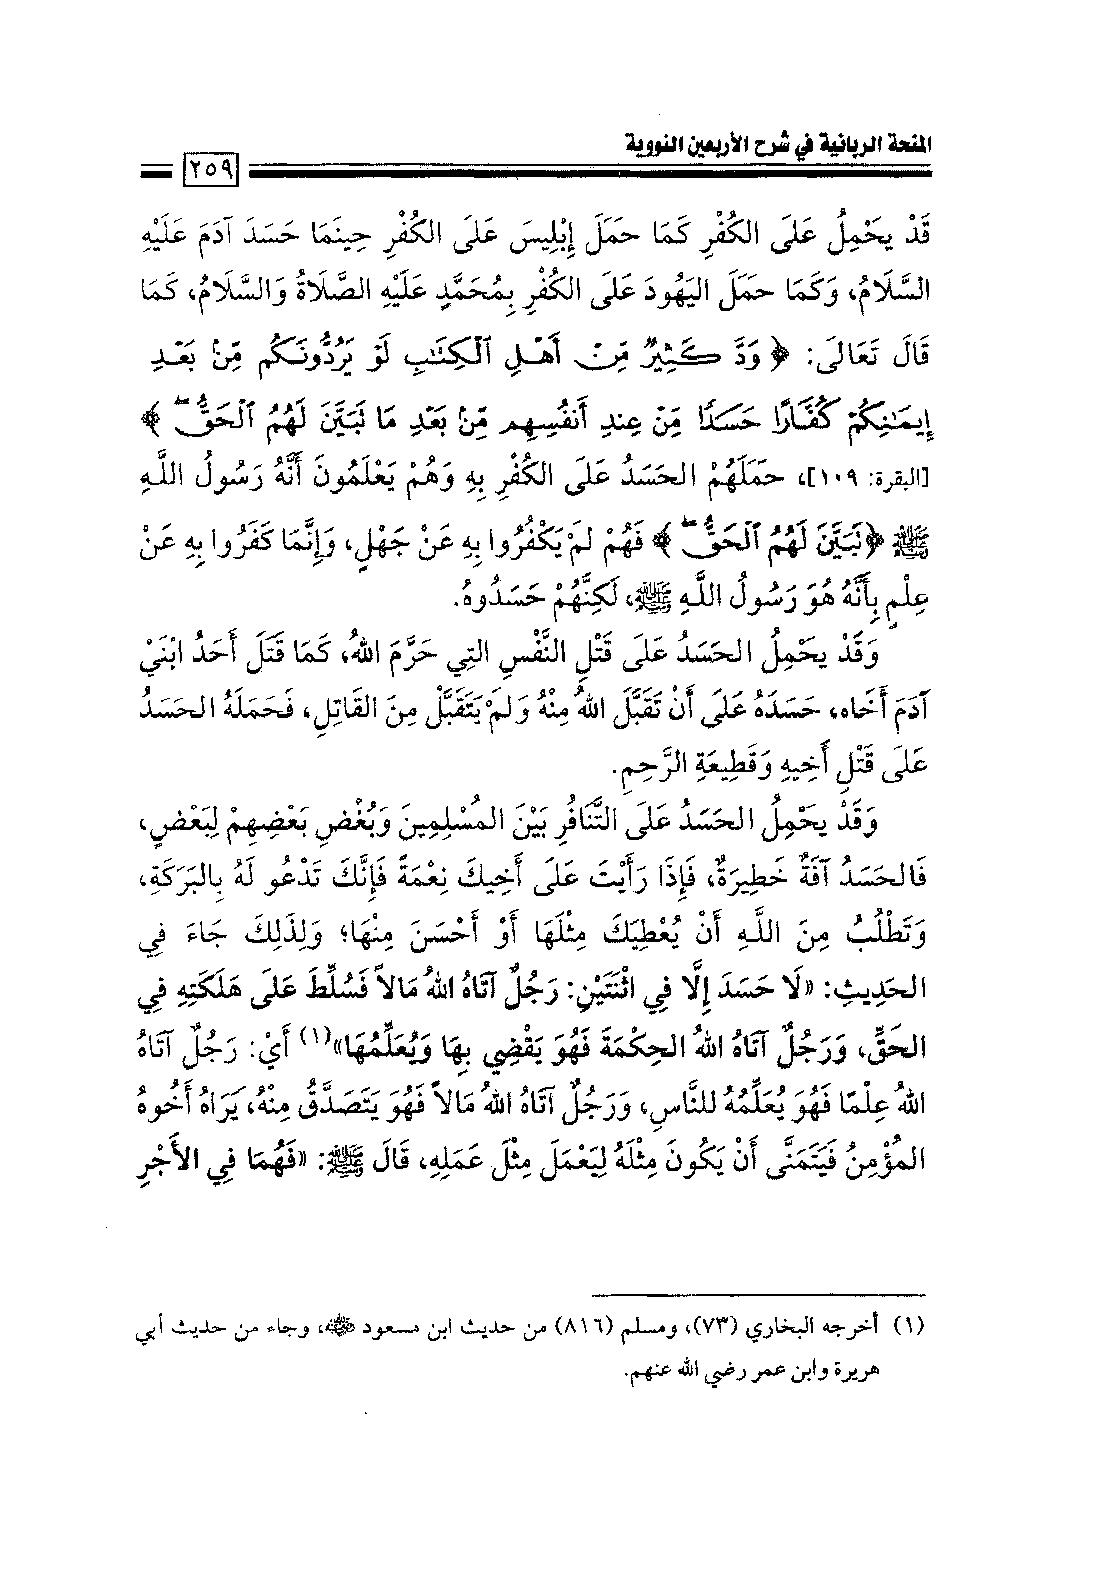 Page 261